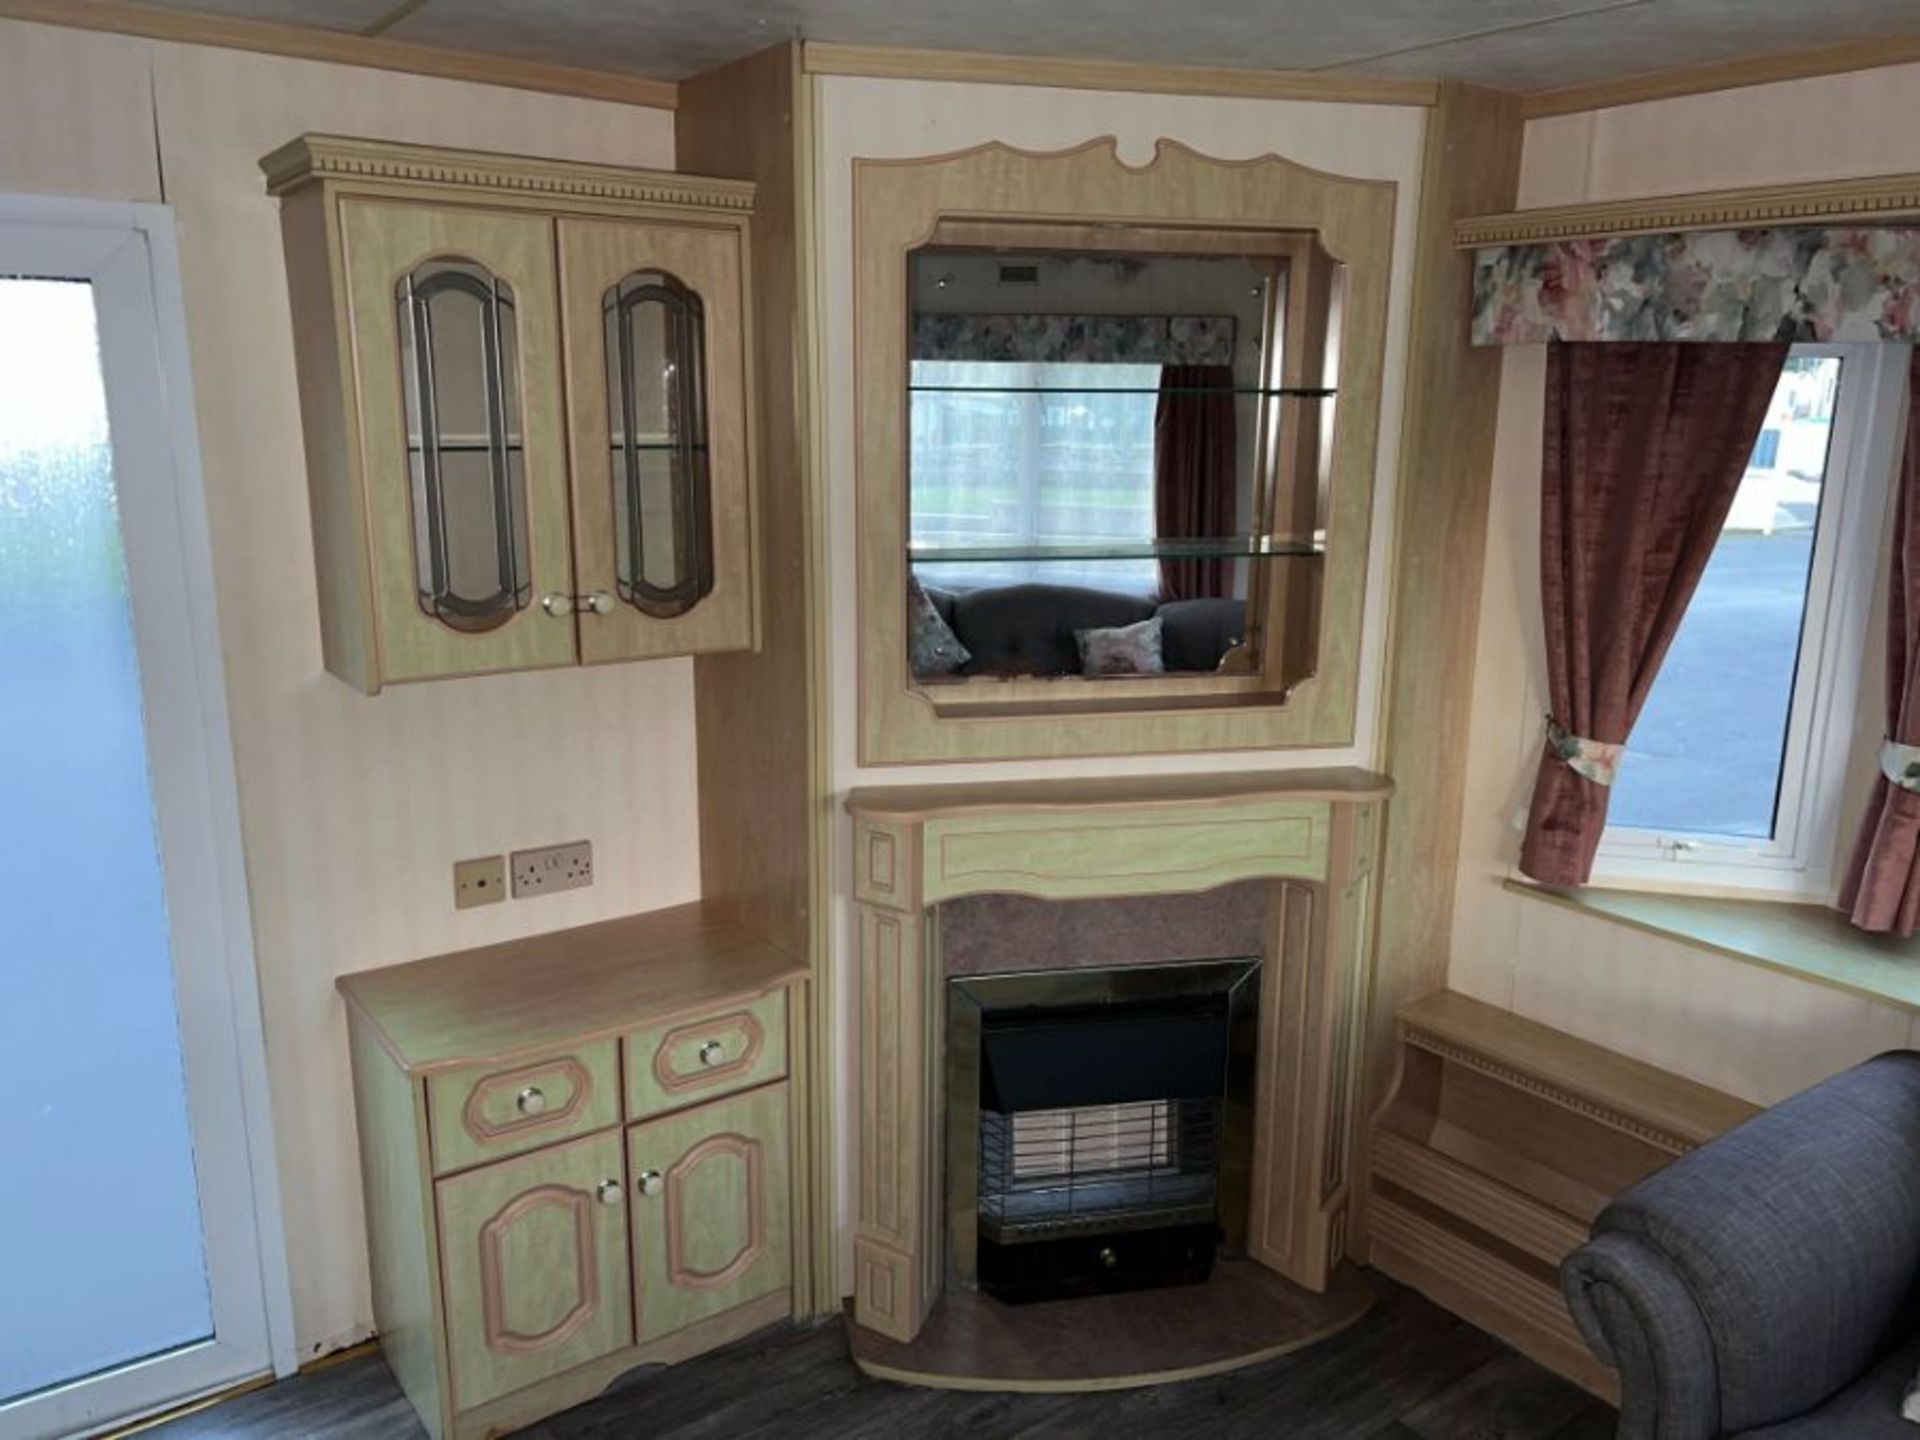 WILLERBY LYNDHURST 37FT X 12FT, 3 BEDROOM STATIC CARAVAN DOUBLE GLAZED & CENTRAL HEATING - LOCATED - Image 18 of 44